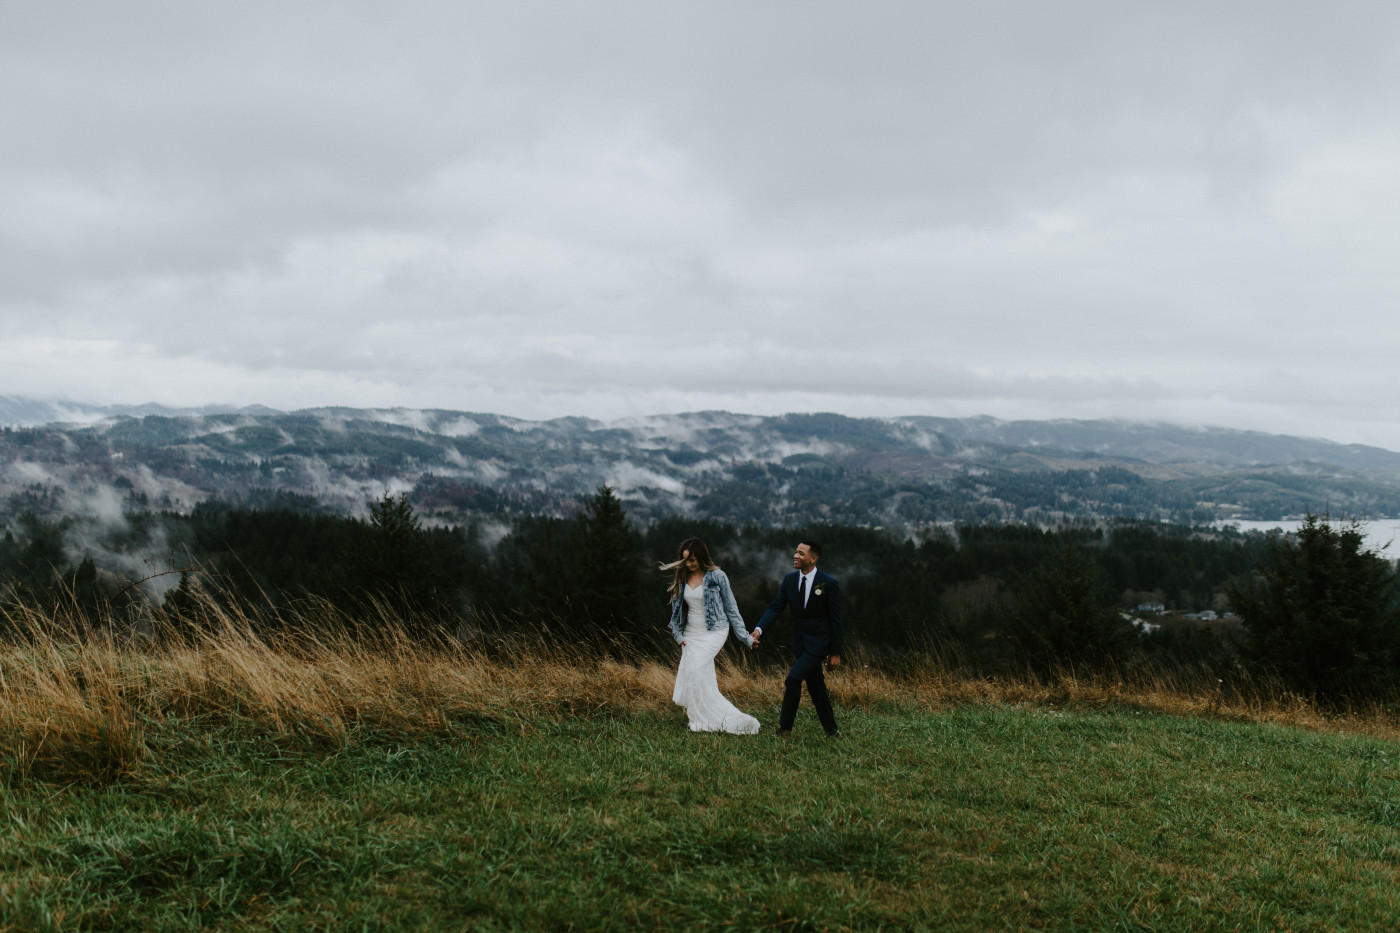 Deandre and Ariana walk. Elopement photography at Mount Hood by Sienna Plus Josh.